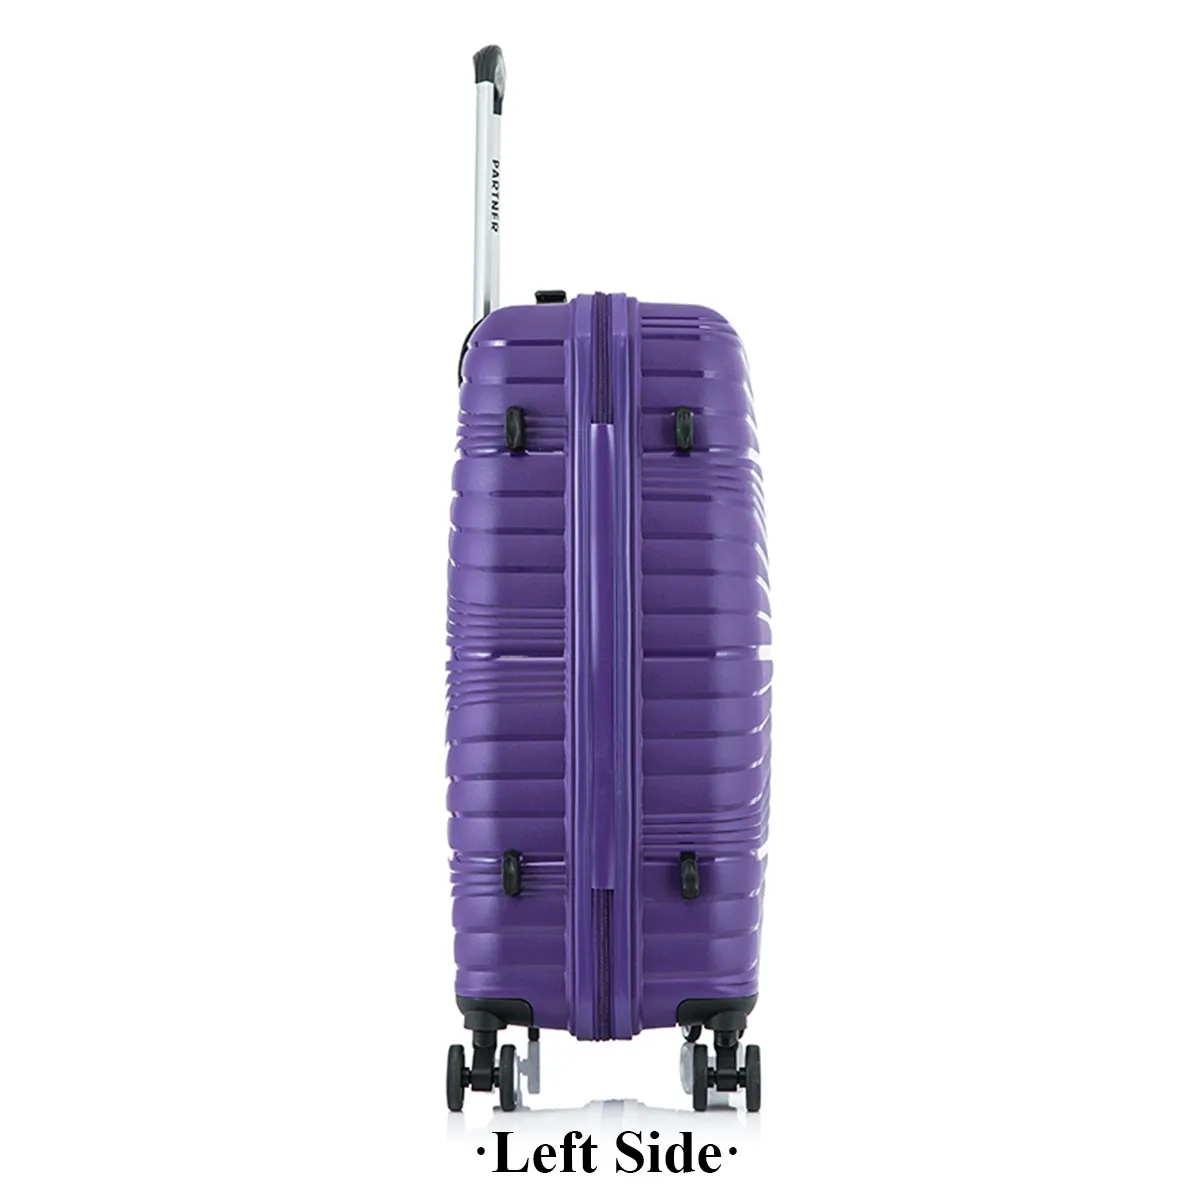 HOT SELLING SIMPLE DESIGN ABS TRAVEL LUGGAGE BAGS TROLLEY LUGGAGE SUITCASE 